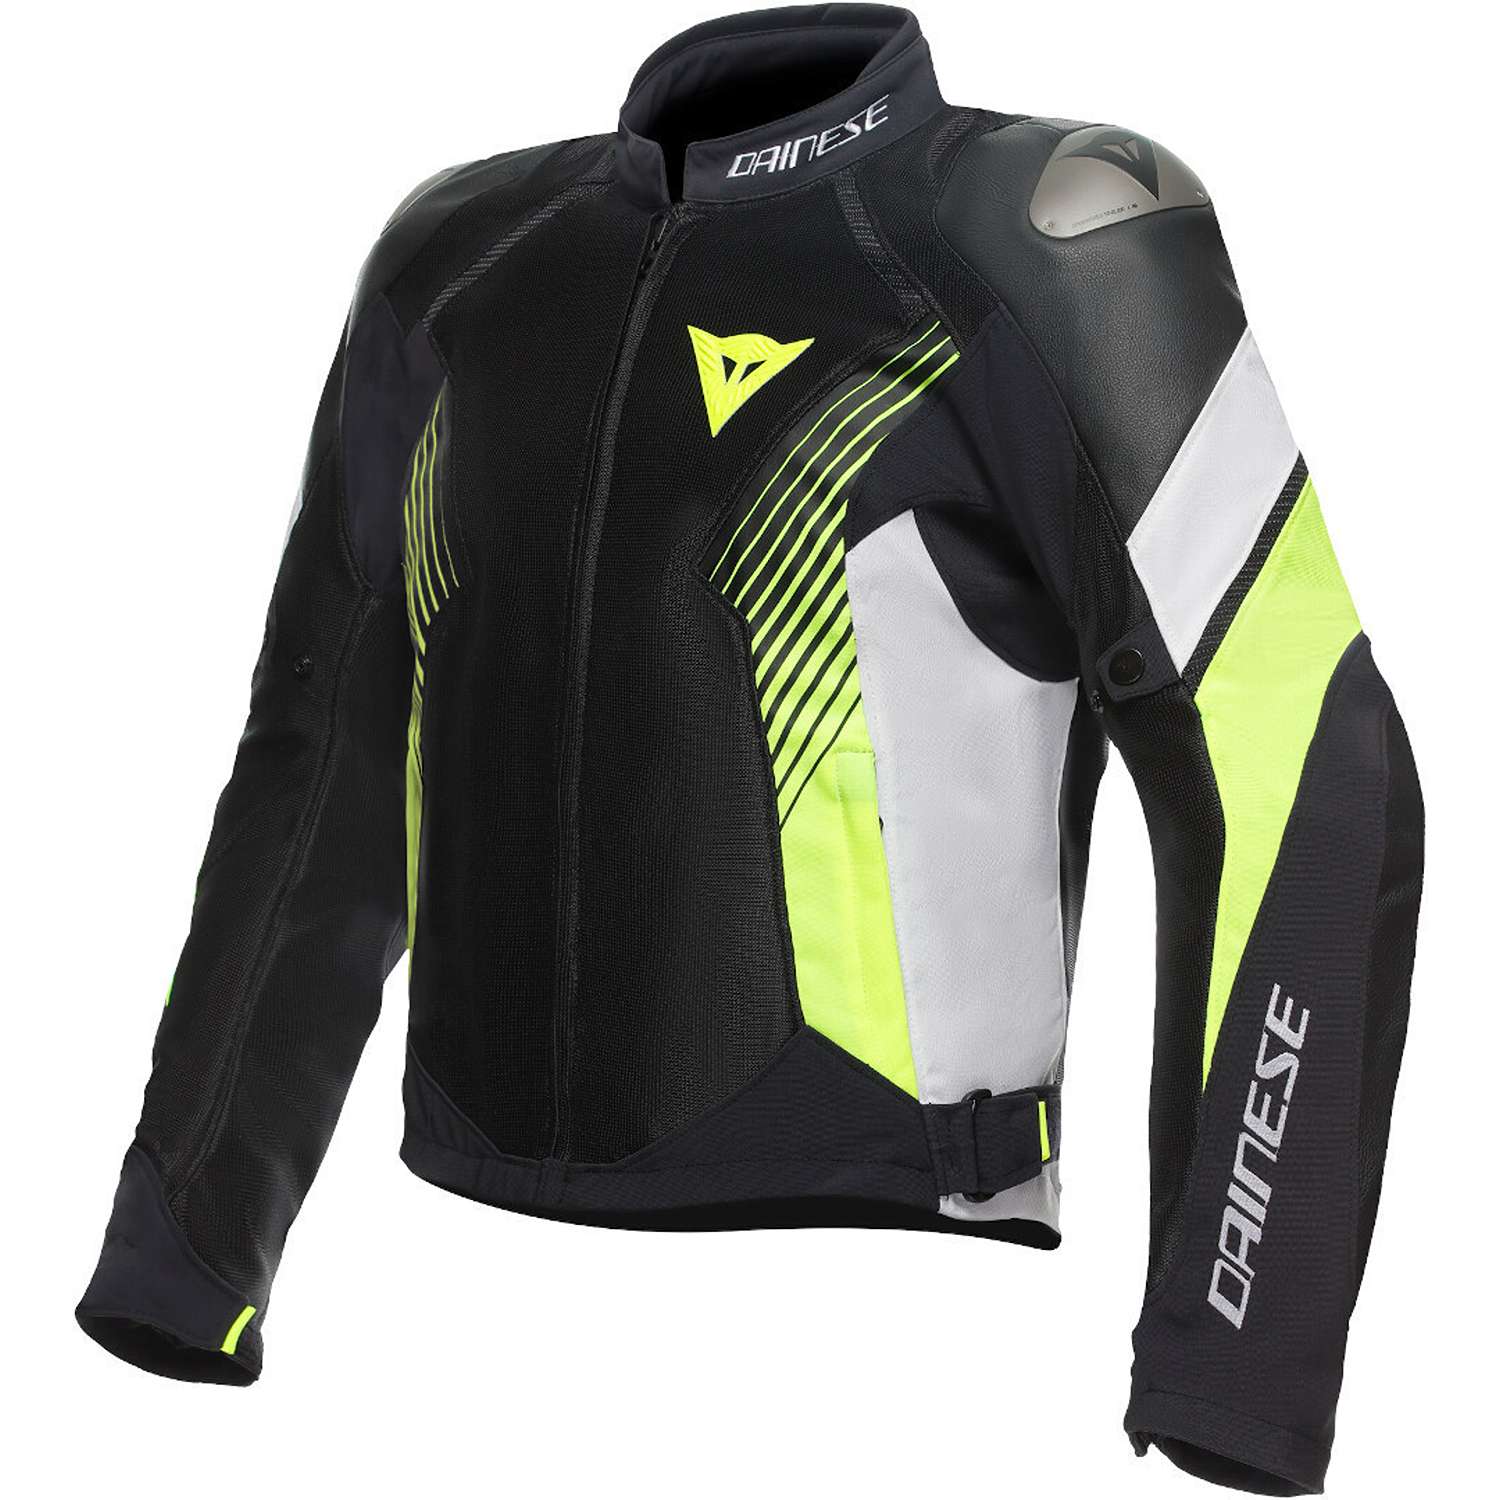 Image of Dainese Super Rider 2 Absoluteshell Jacket Black White Fluo Yellow Talla 56